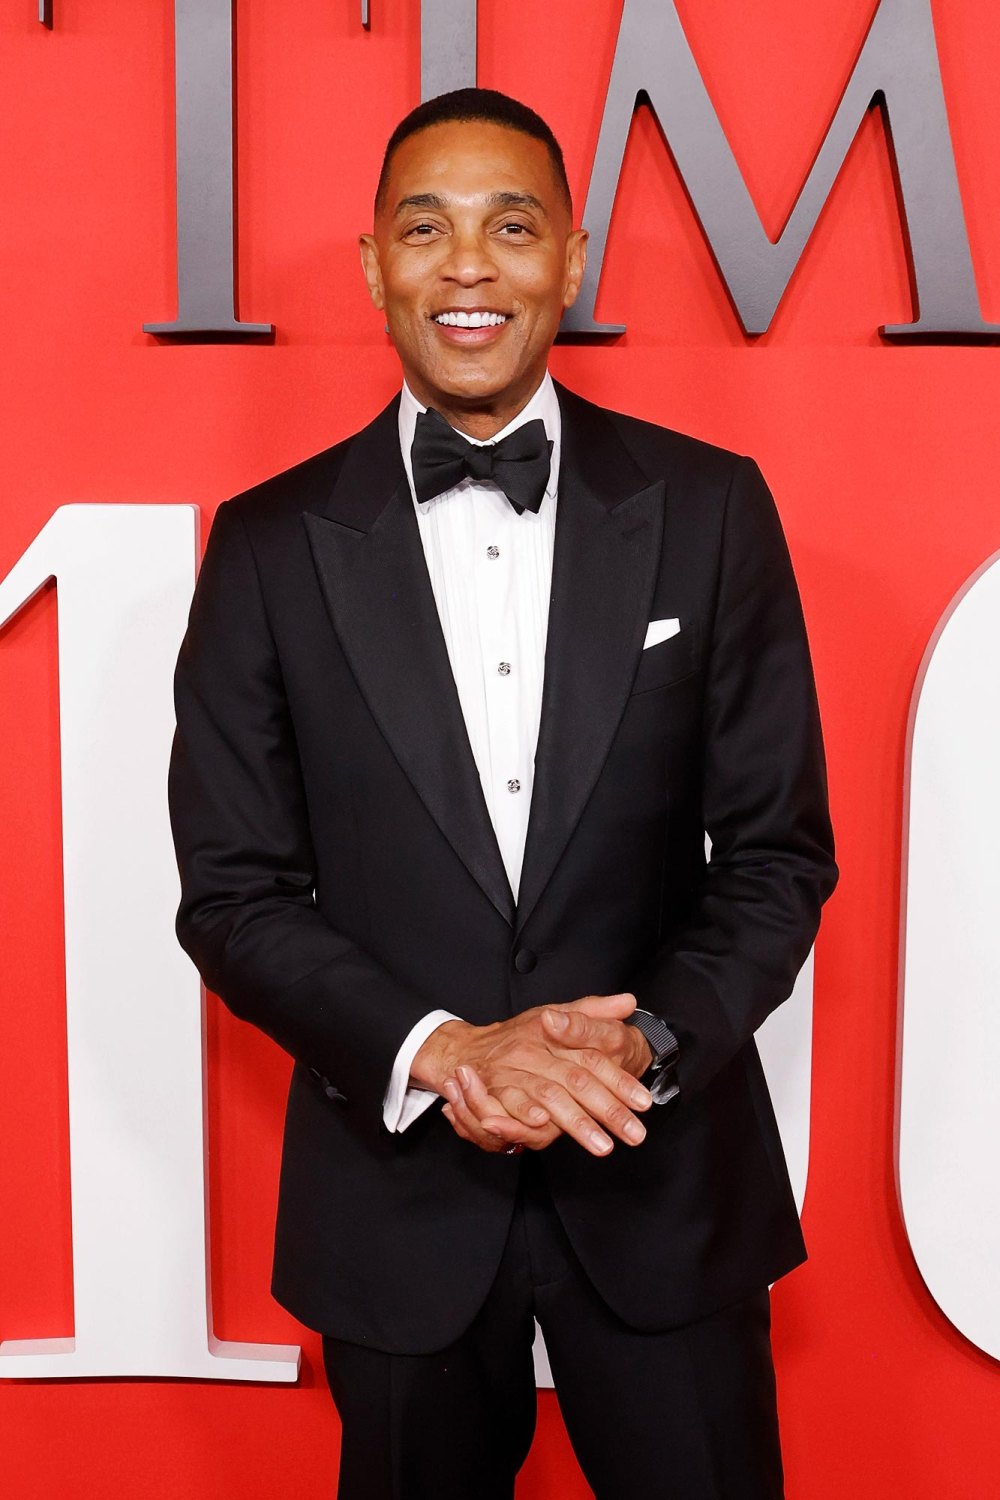 How Don Lemon Cultivated a Star-Studded Wedding: It Wasn't Meant to Be a Celebrity Guest List 276